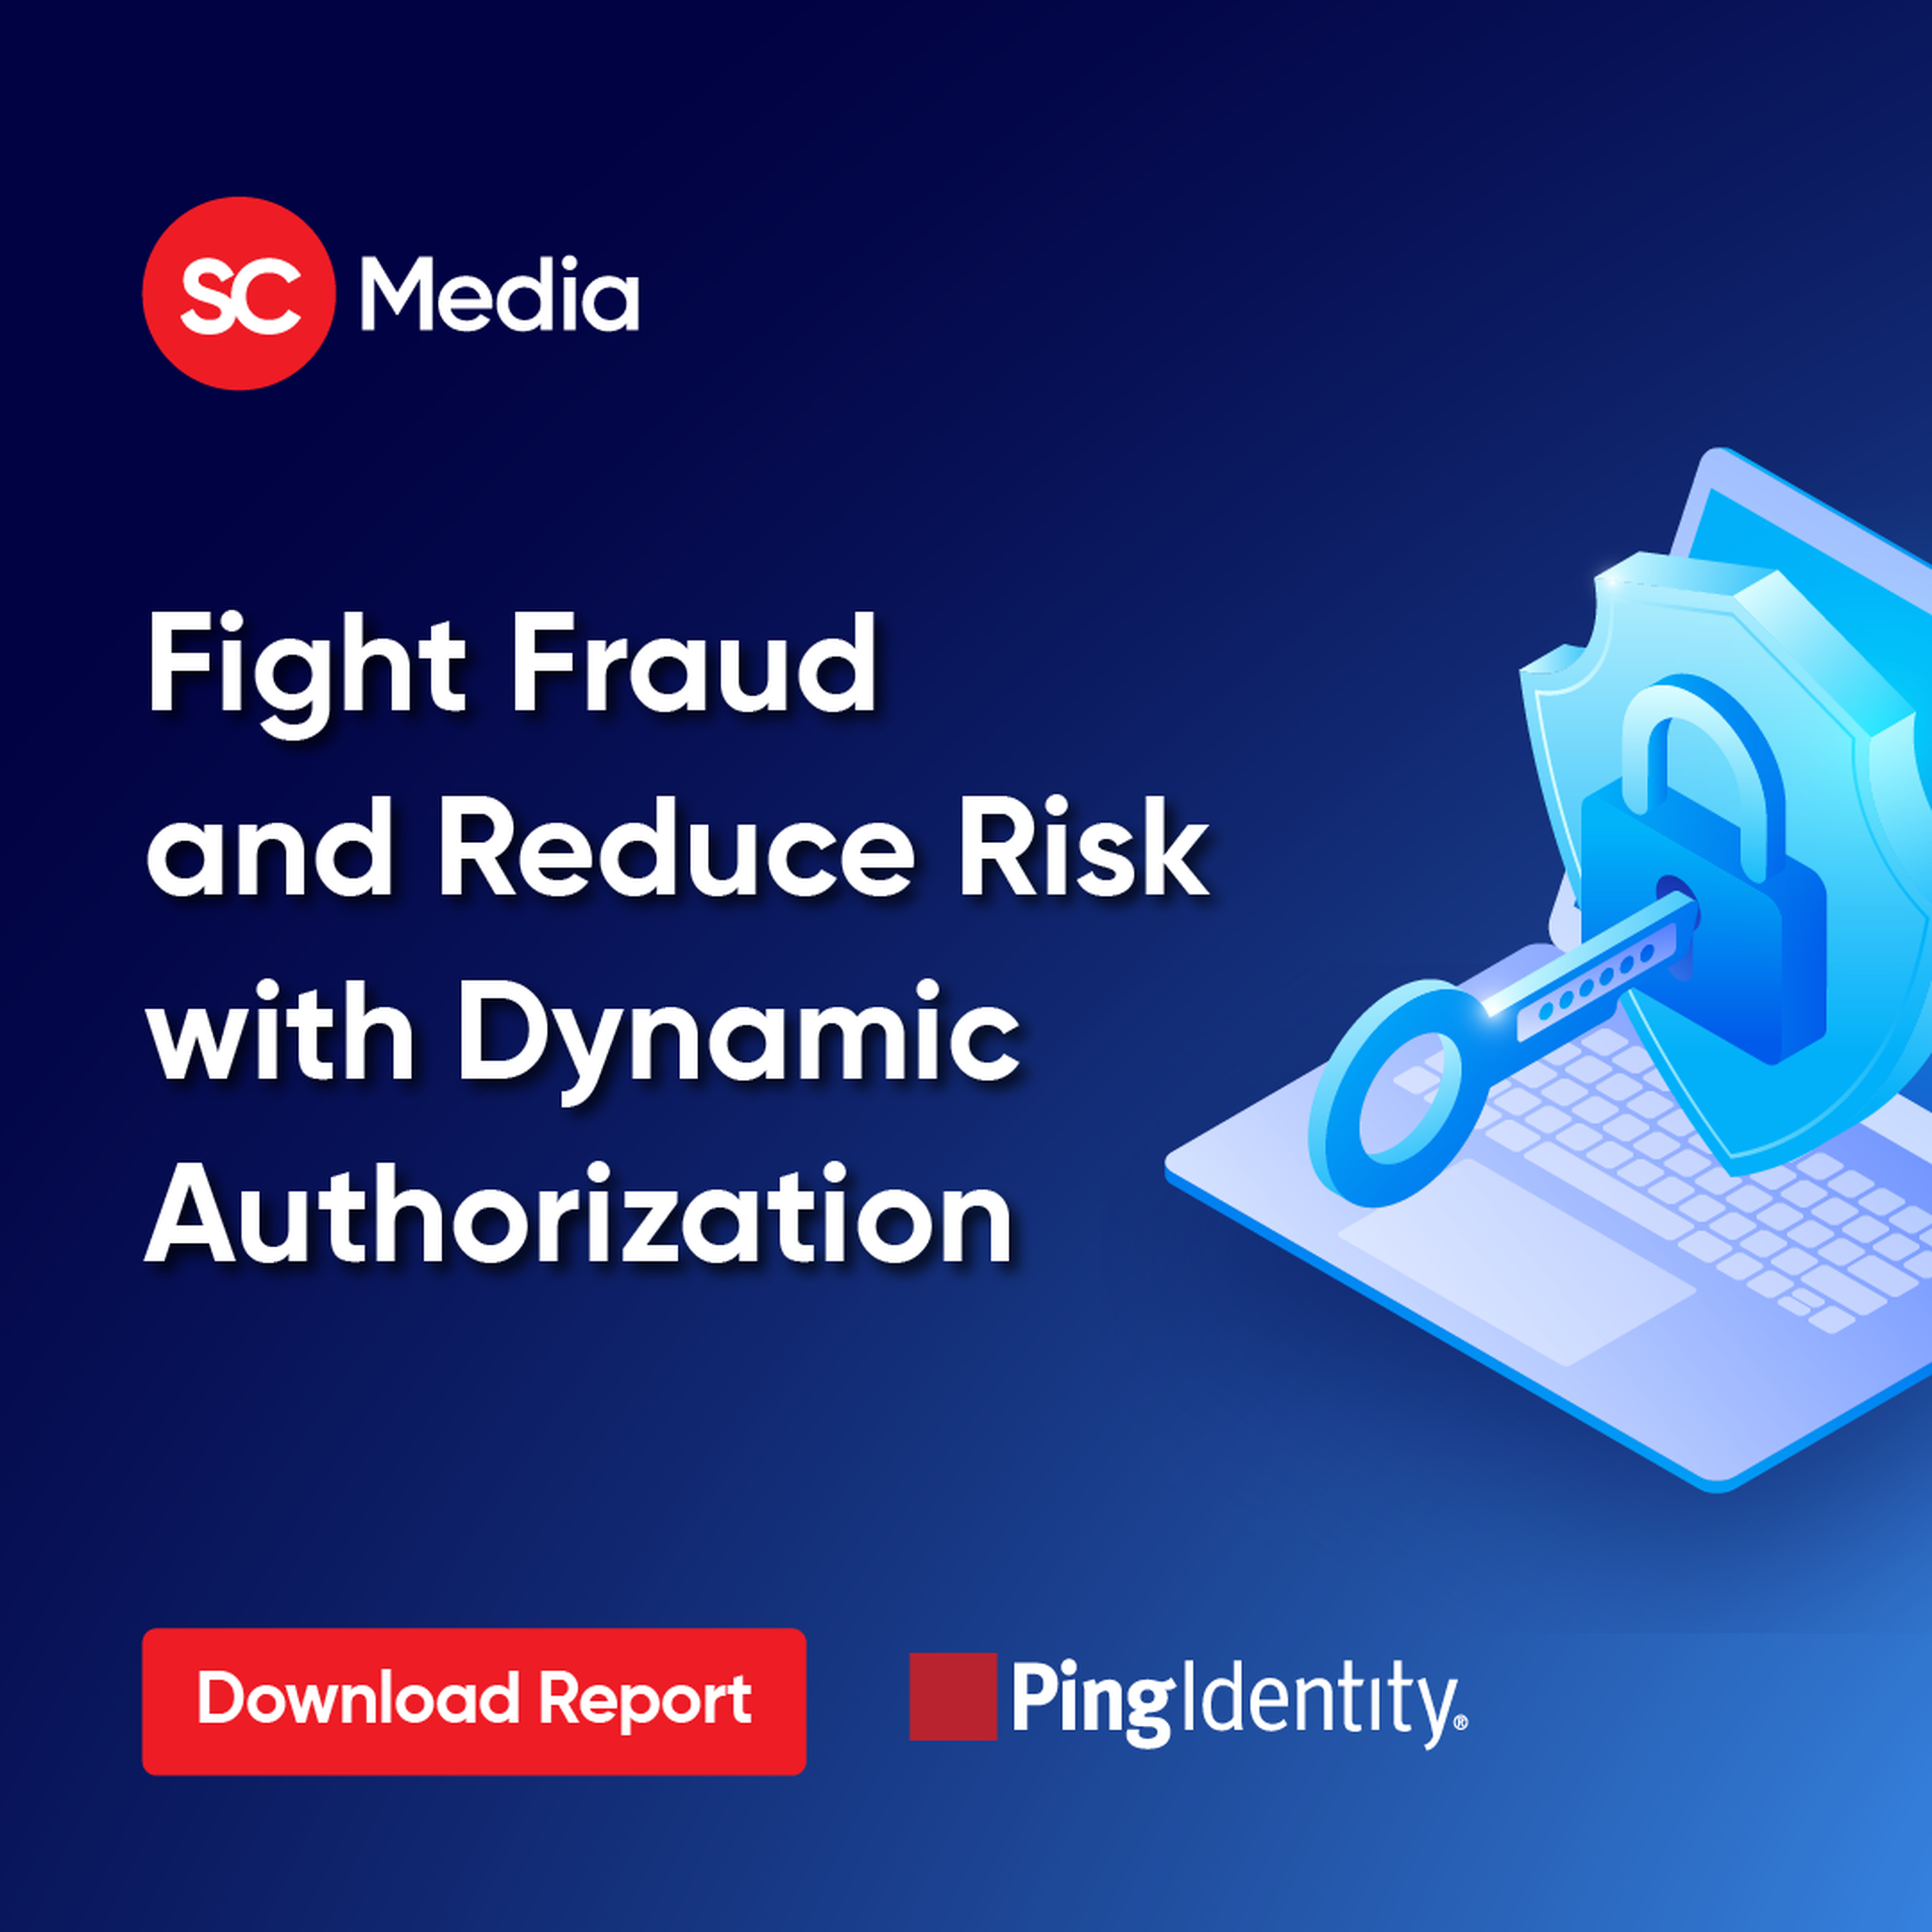 Fight Fraud and Reduce Risk with Dynamic Authorization